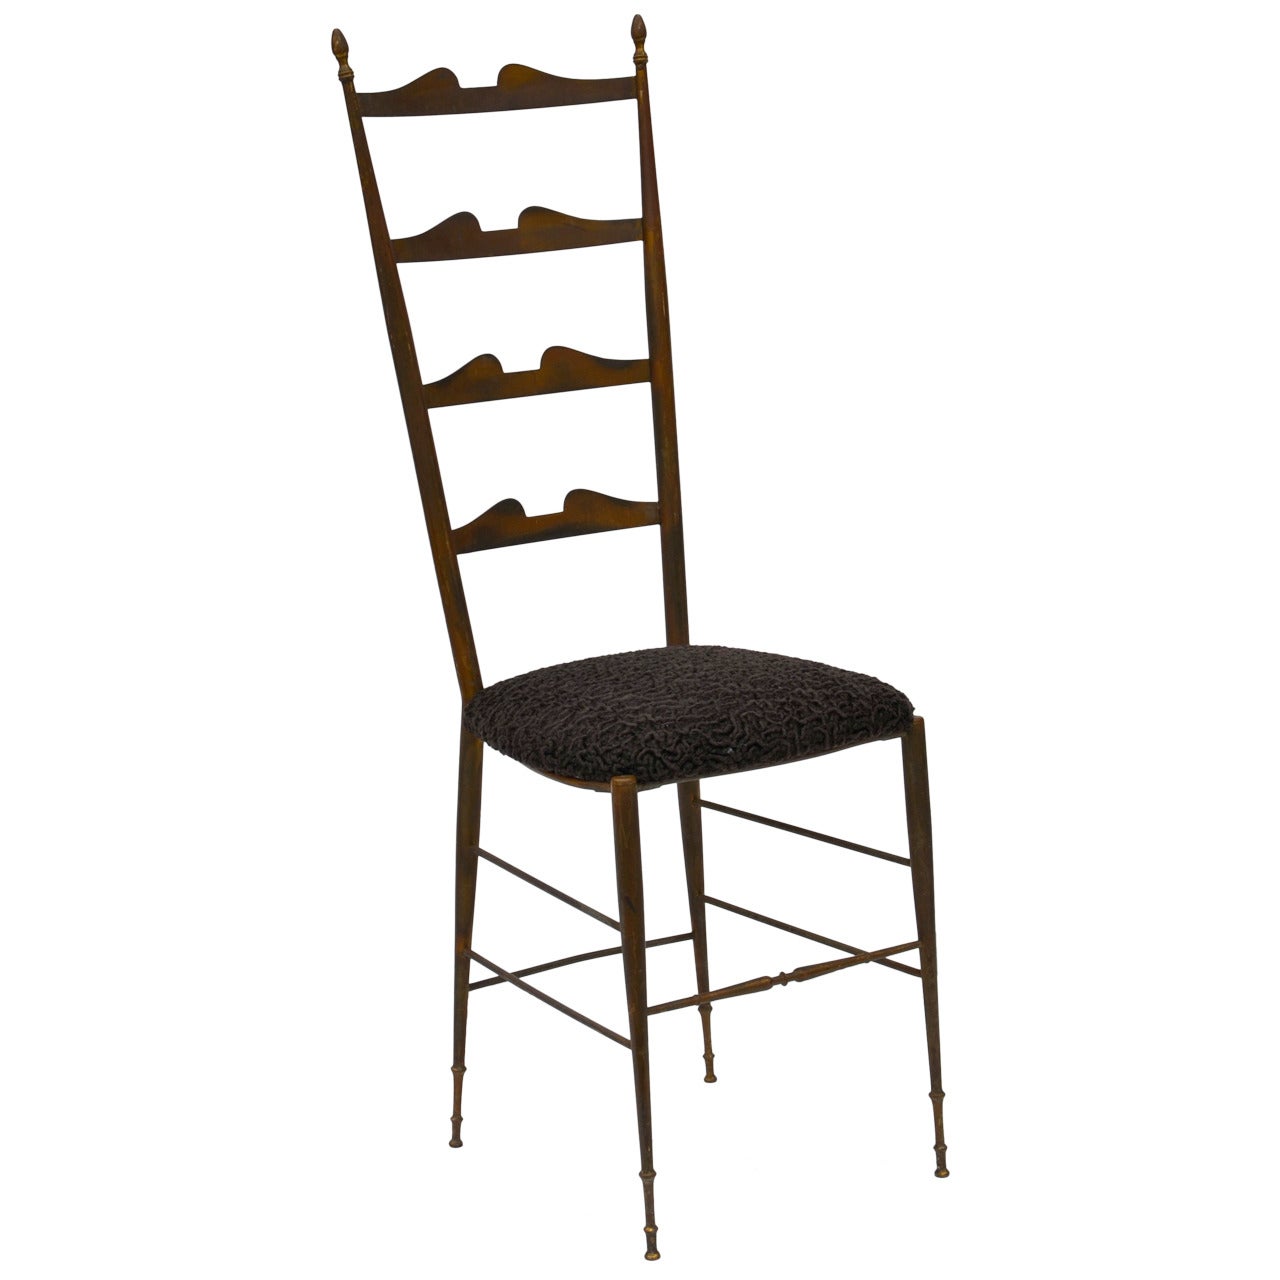 Tall Patinated Brass and Astrakhan Seat Side Chair by Chiavari